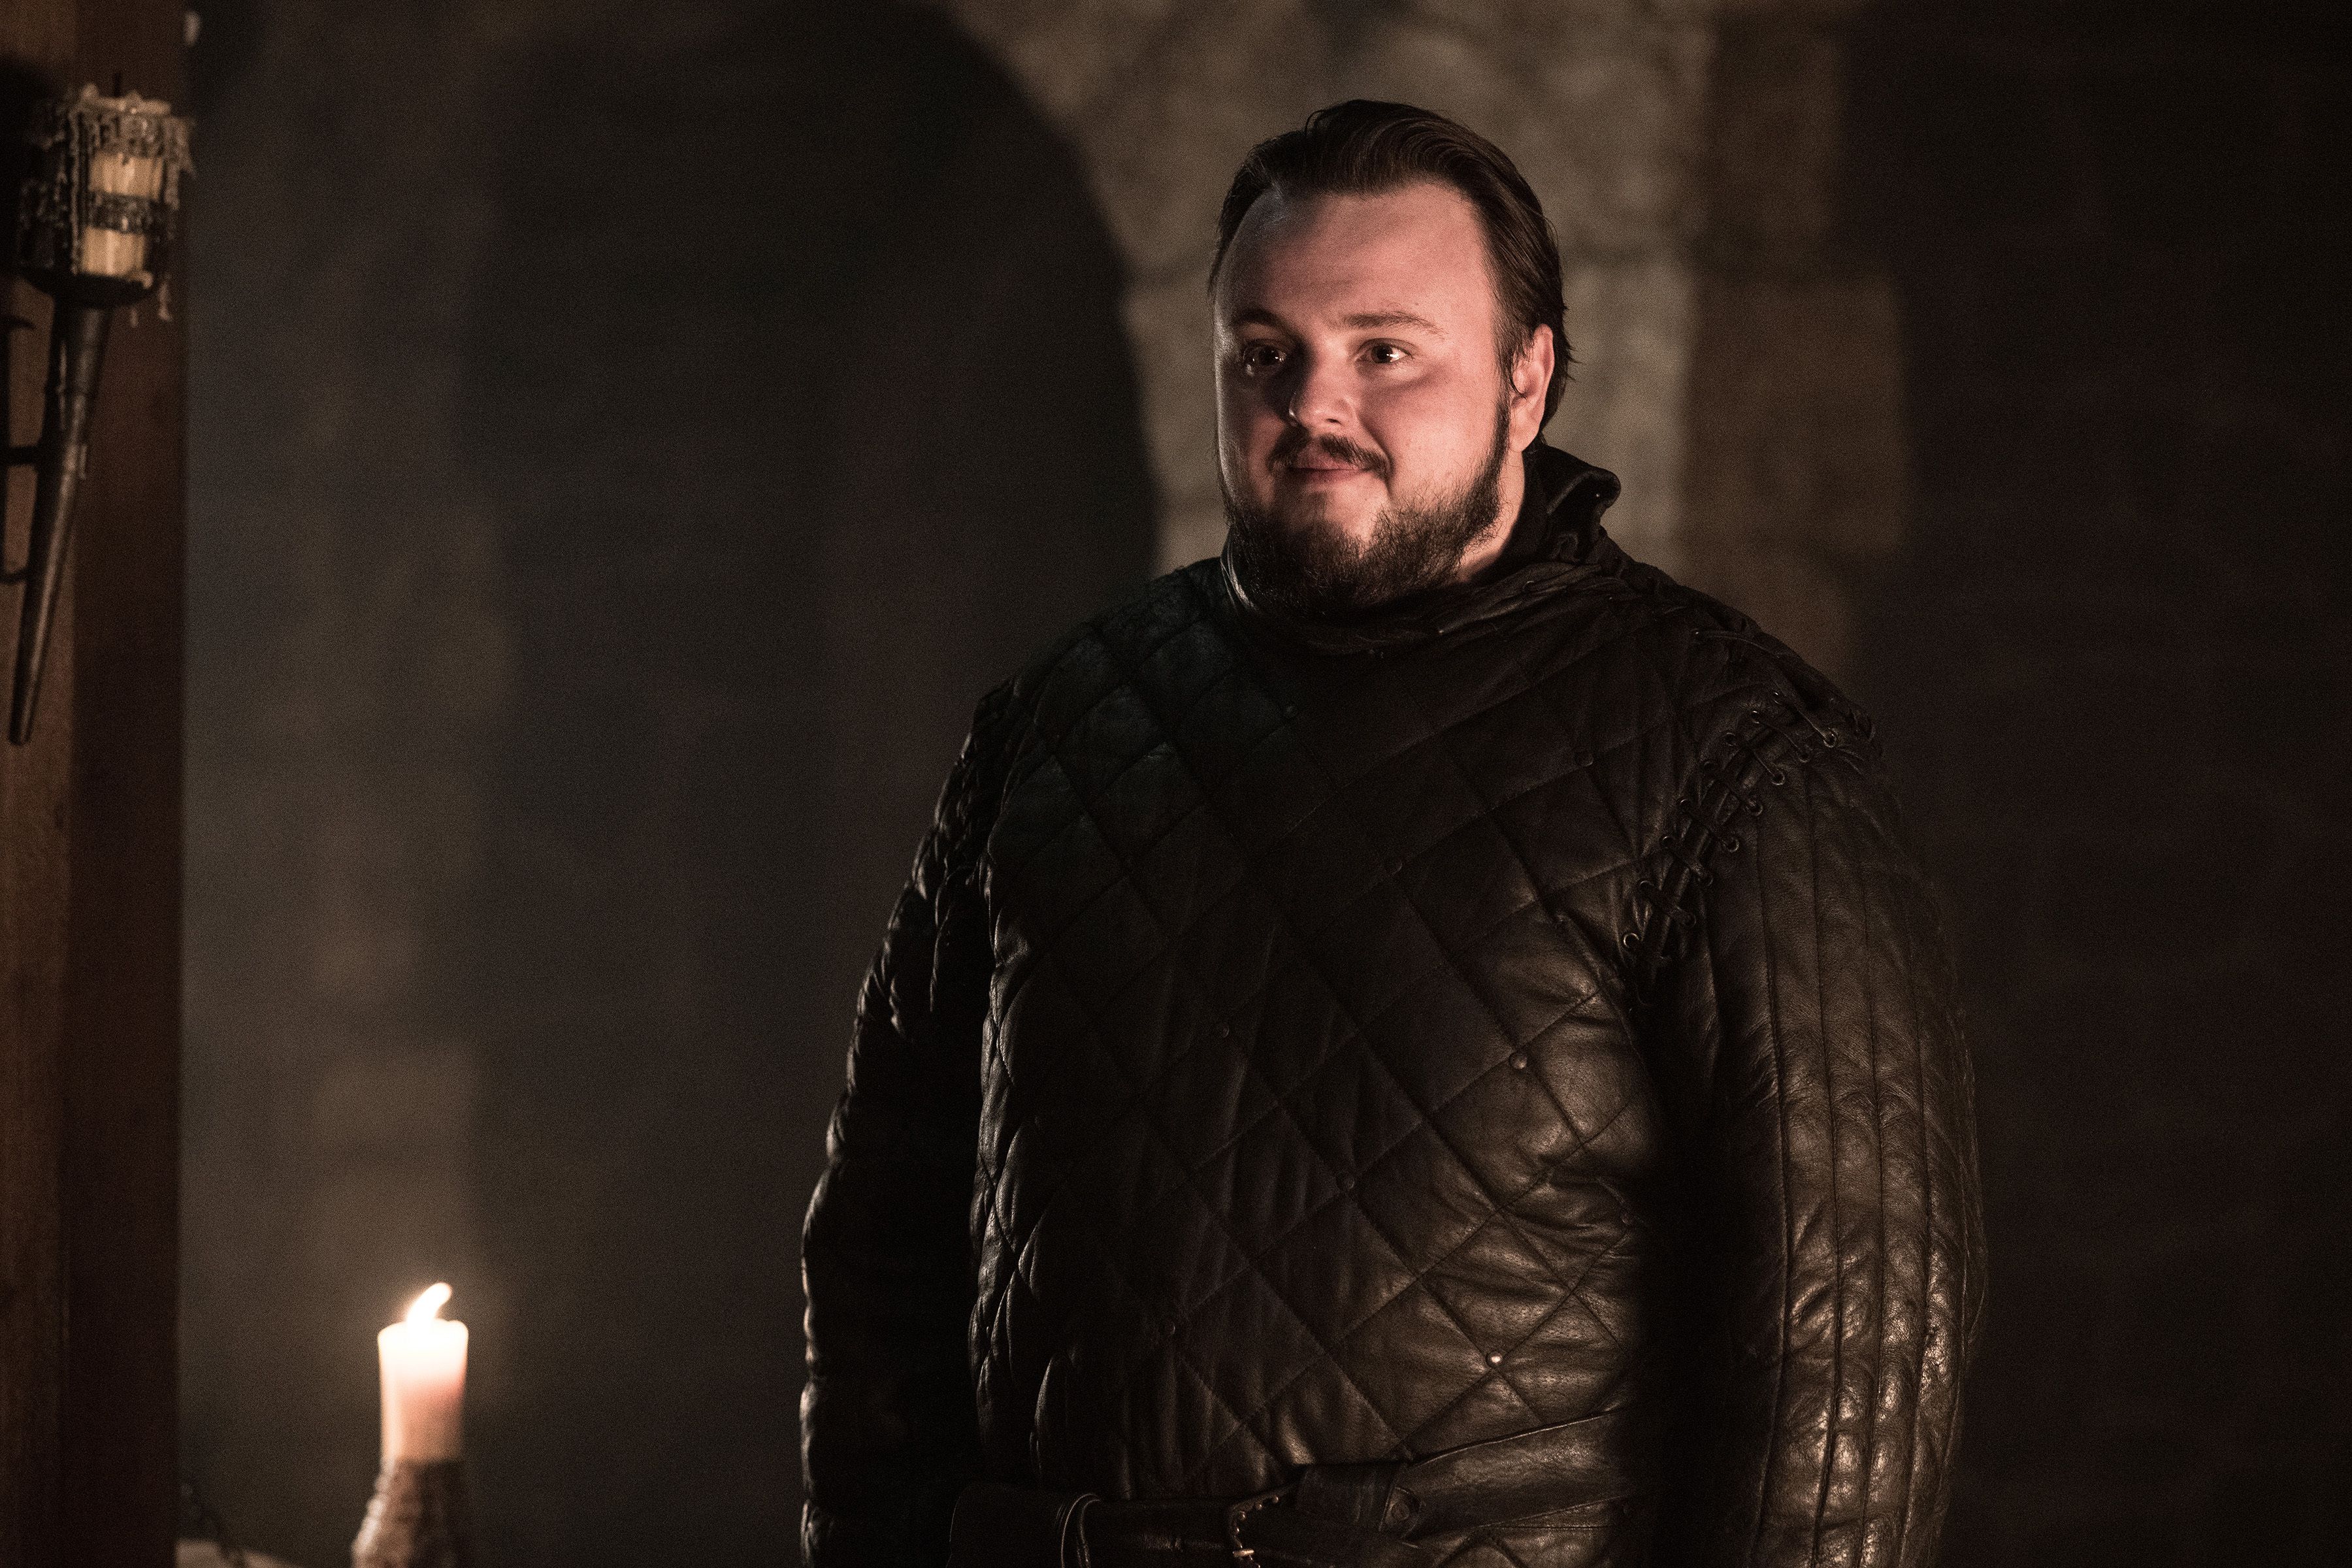 Samwell Tarly is the Hero of the Week in Game of Thrones season 8